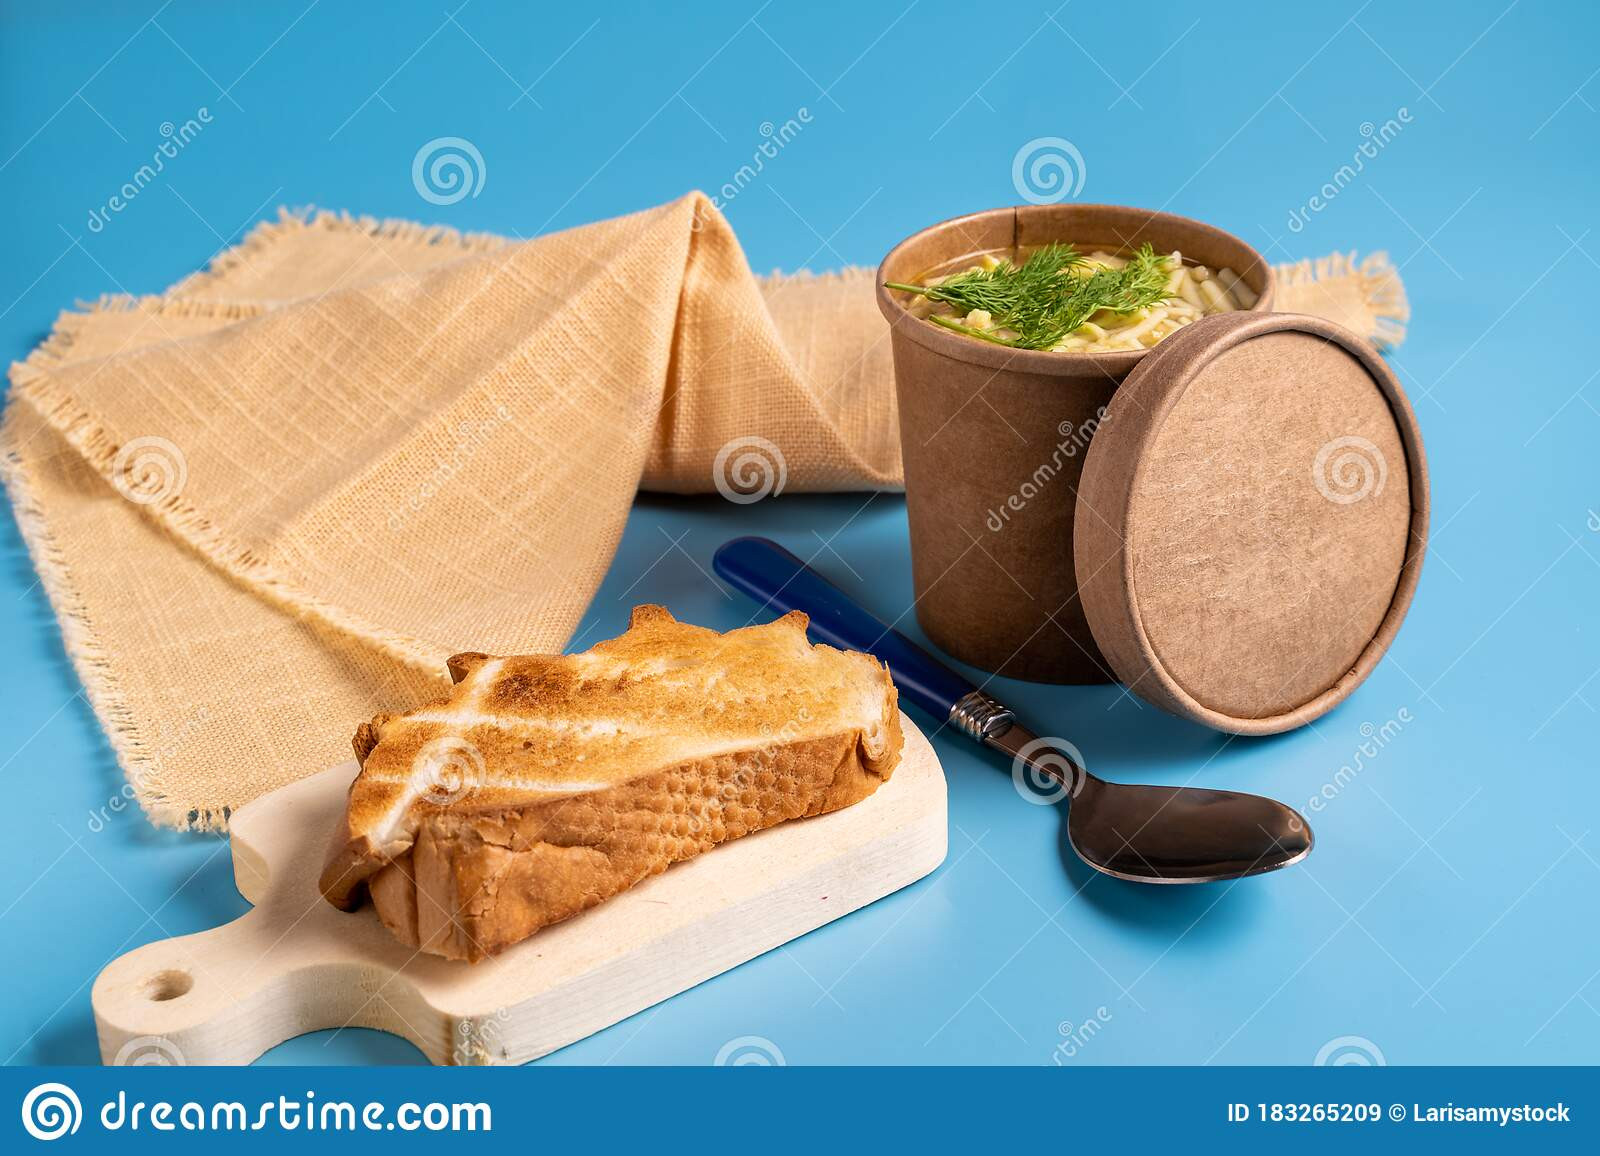 Chicken Soup Delivery
 Chicken Soup In Paper Disposable Cup For Take Away And